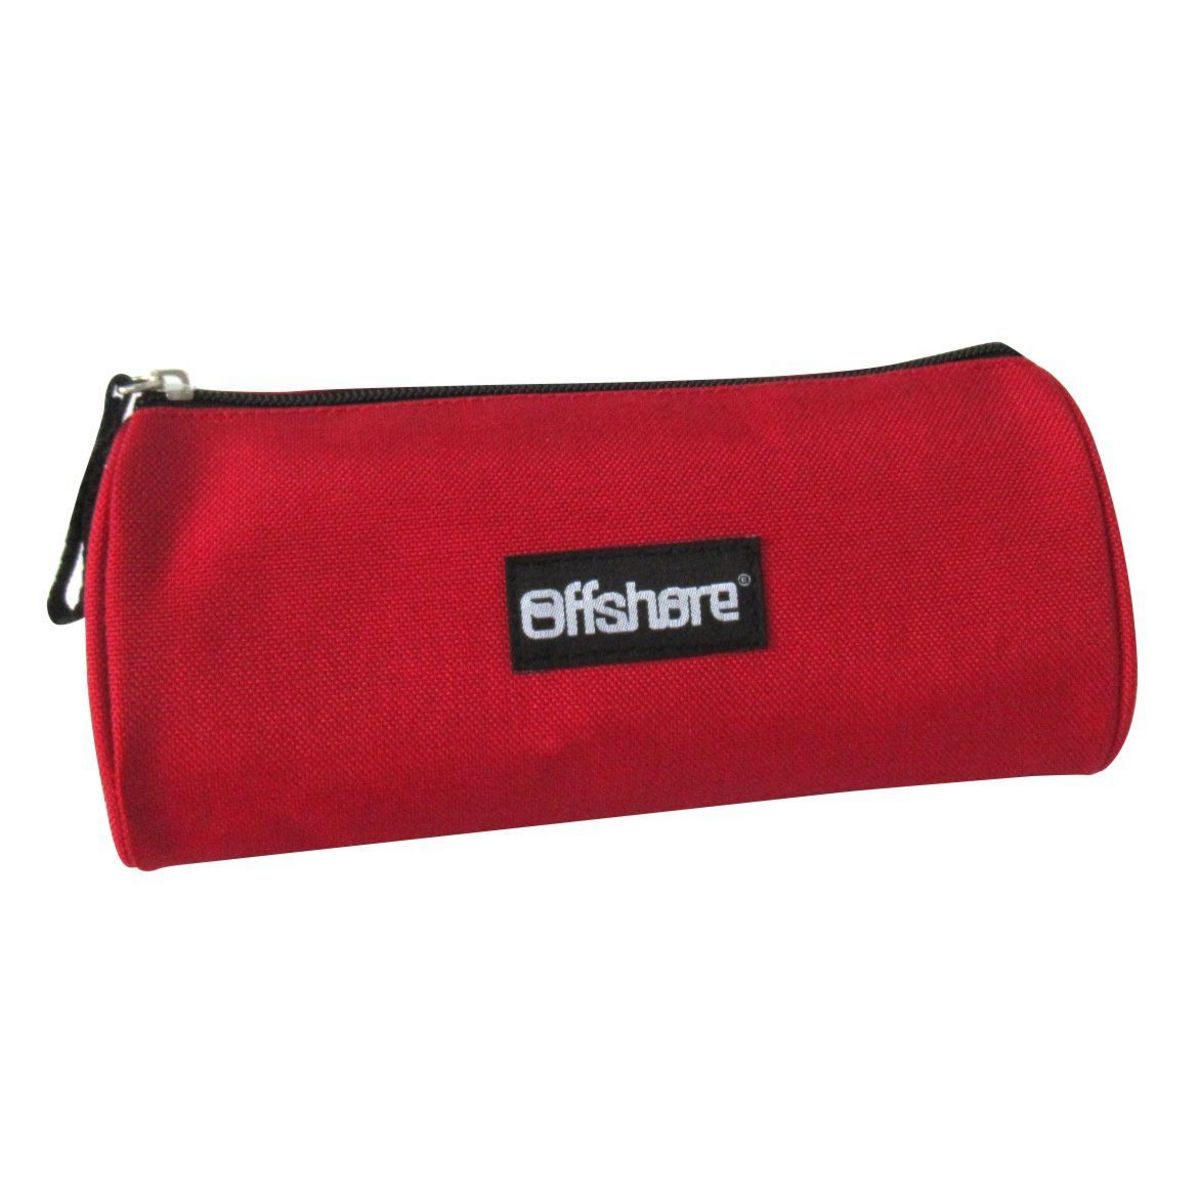 Bagtrotter BAGTROTTER Trousse scolaire Offshore Rouge